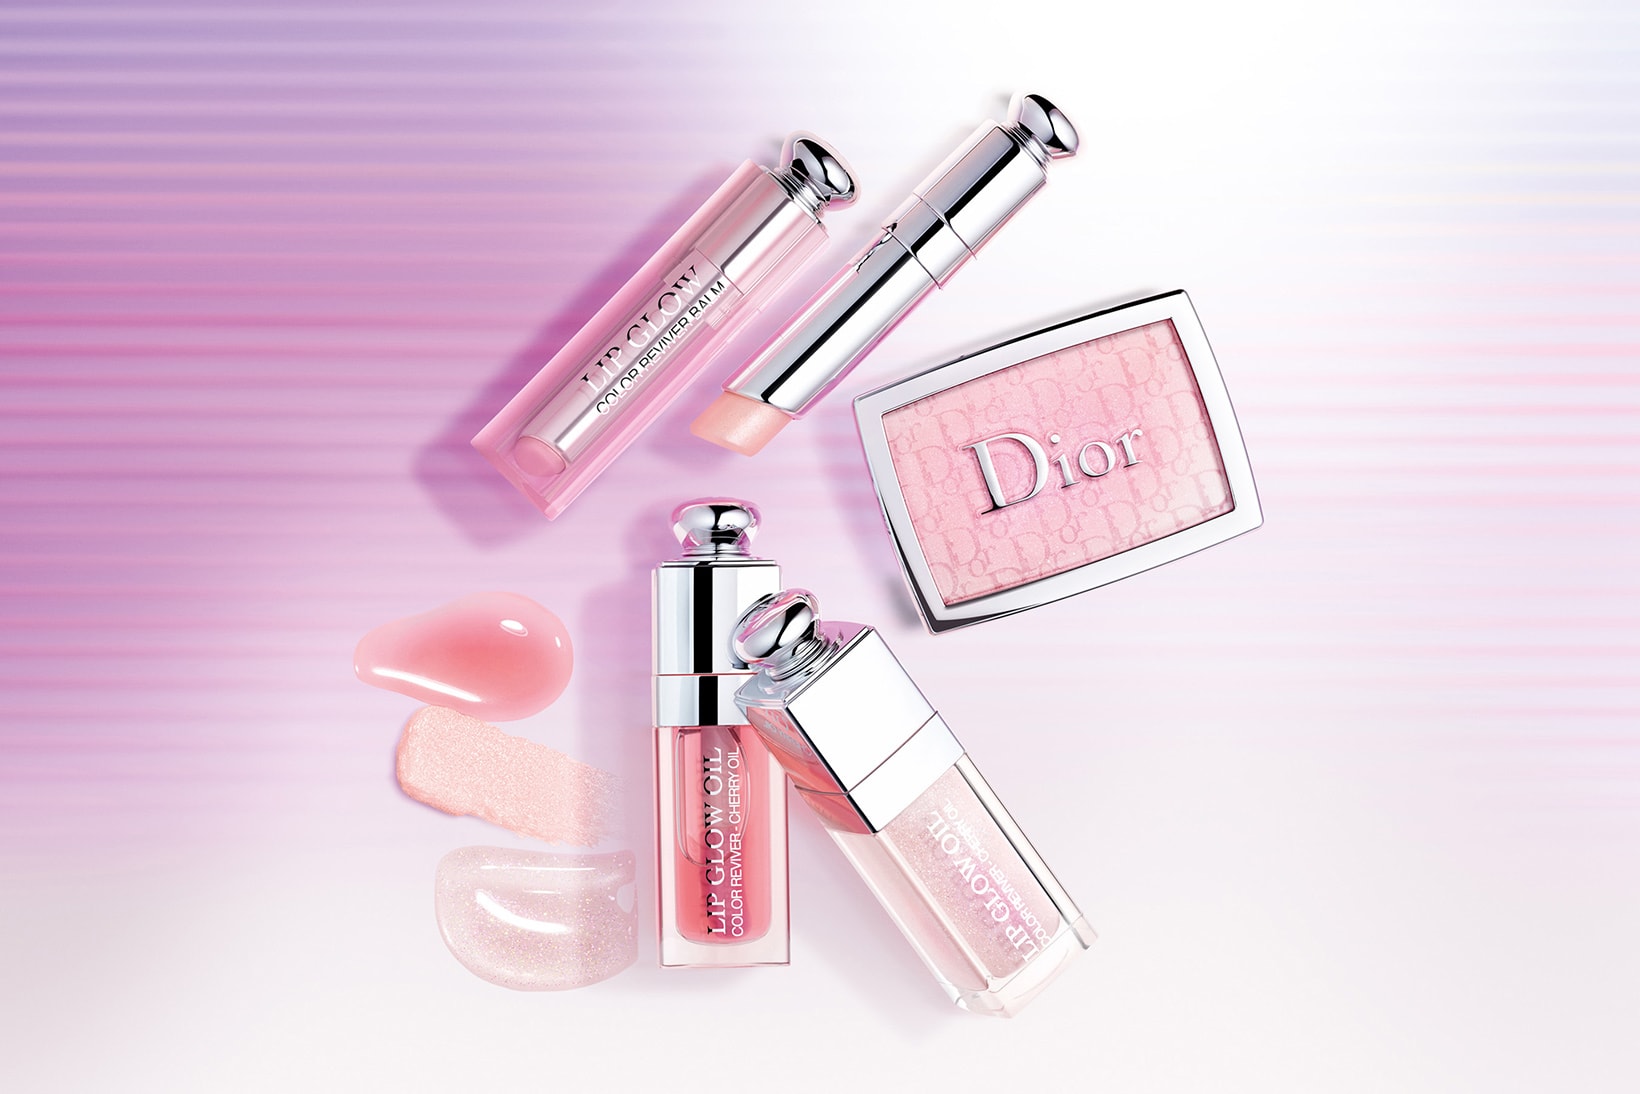 Dior Beauty "Glow Vibes" Spring Summer 2020 Makeup Collection Lip Glow Oil Balm Backstage Rosy Glow